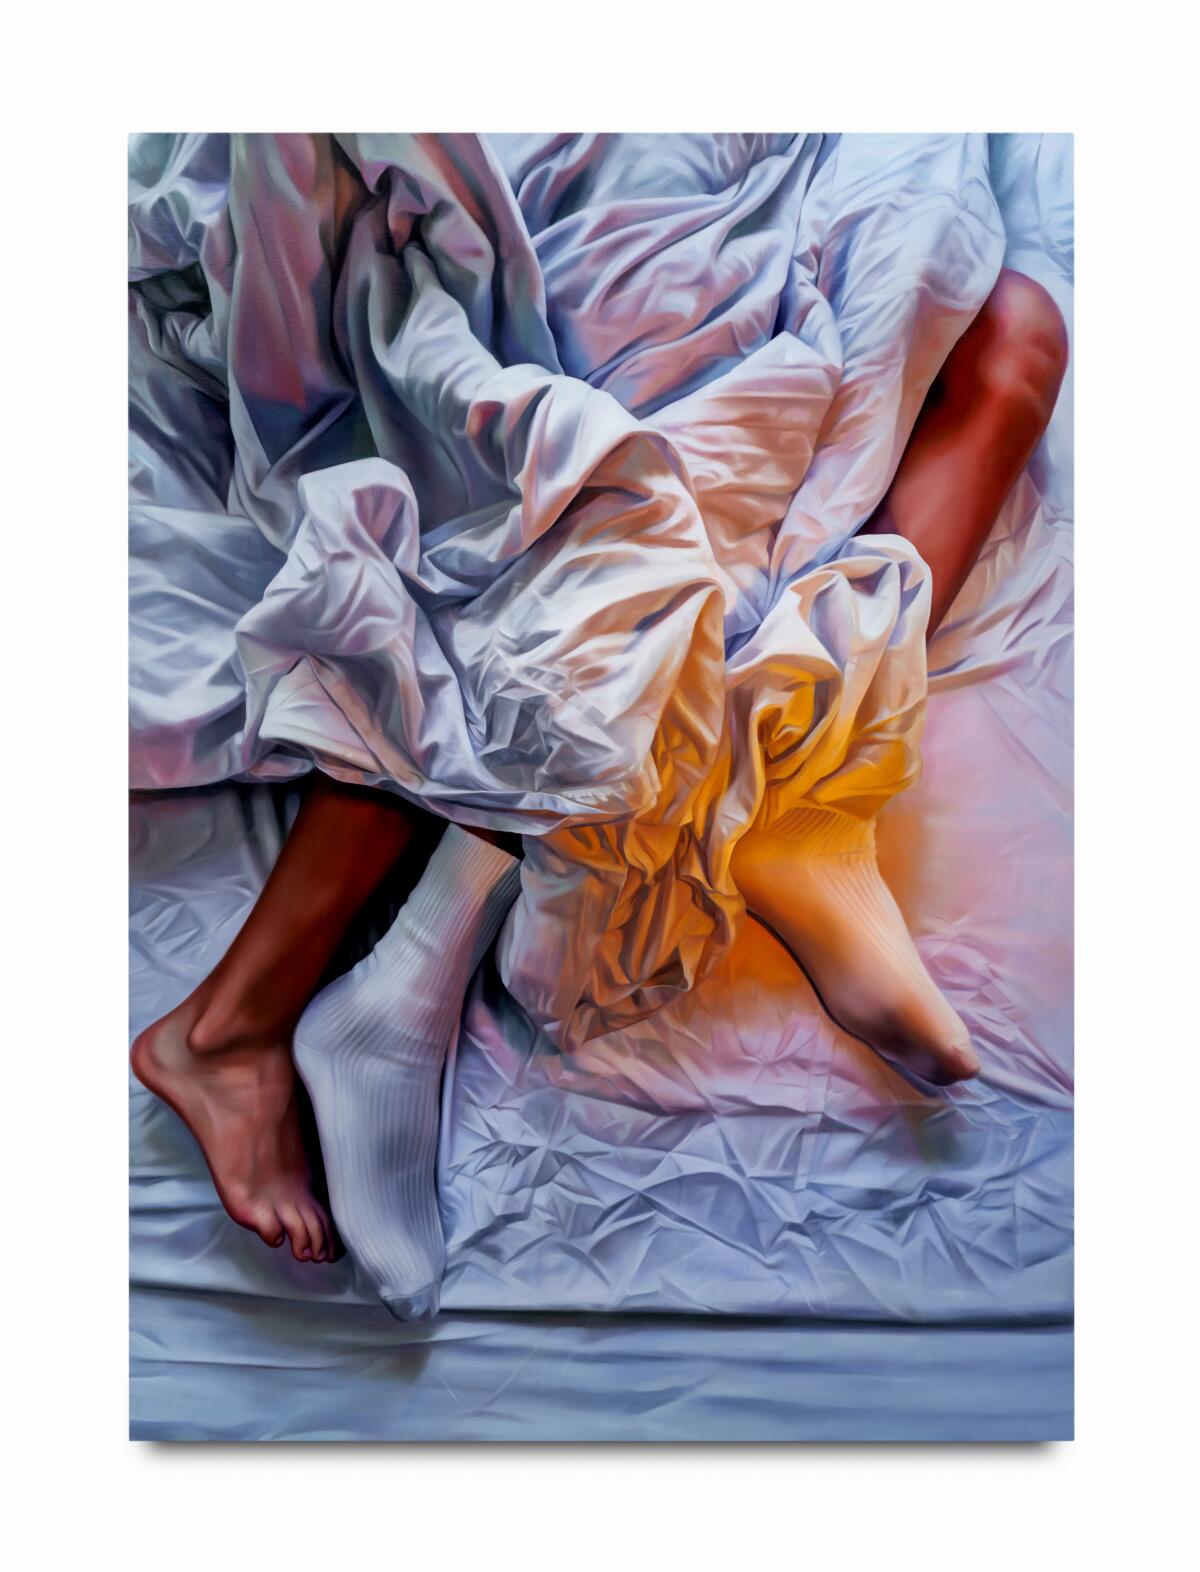 An oil painting of three feet sticking out of bed sheets.